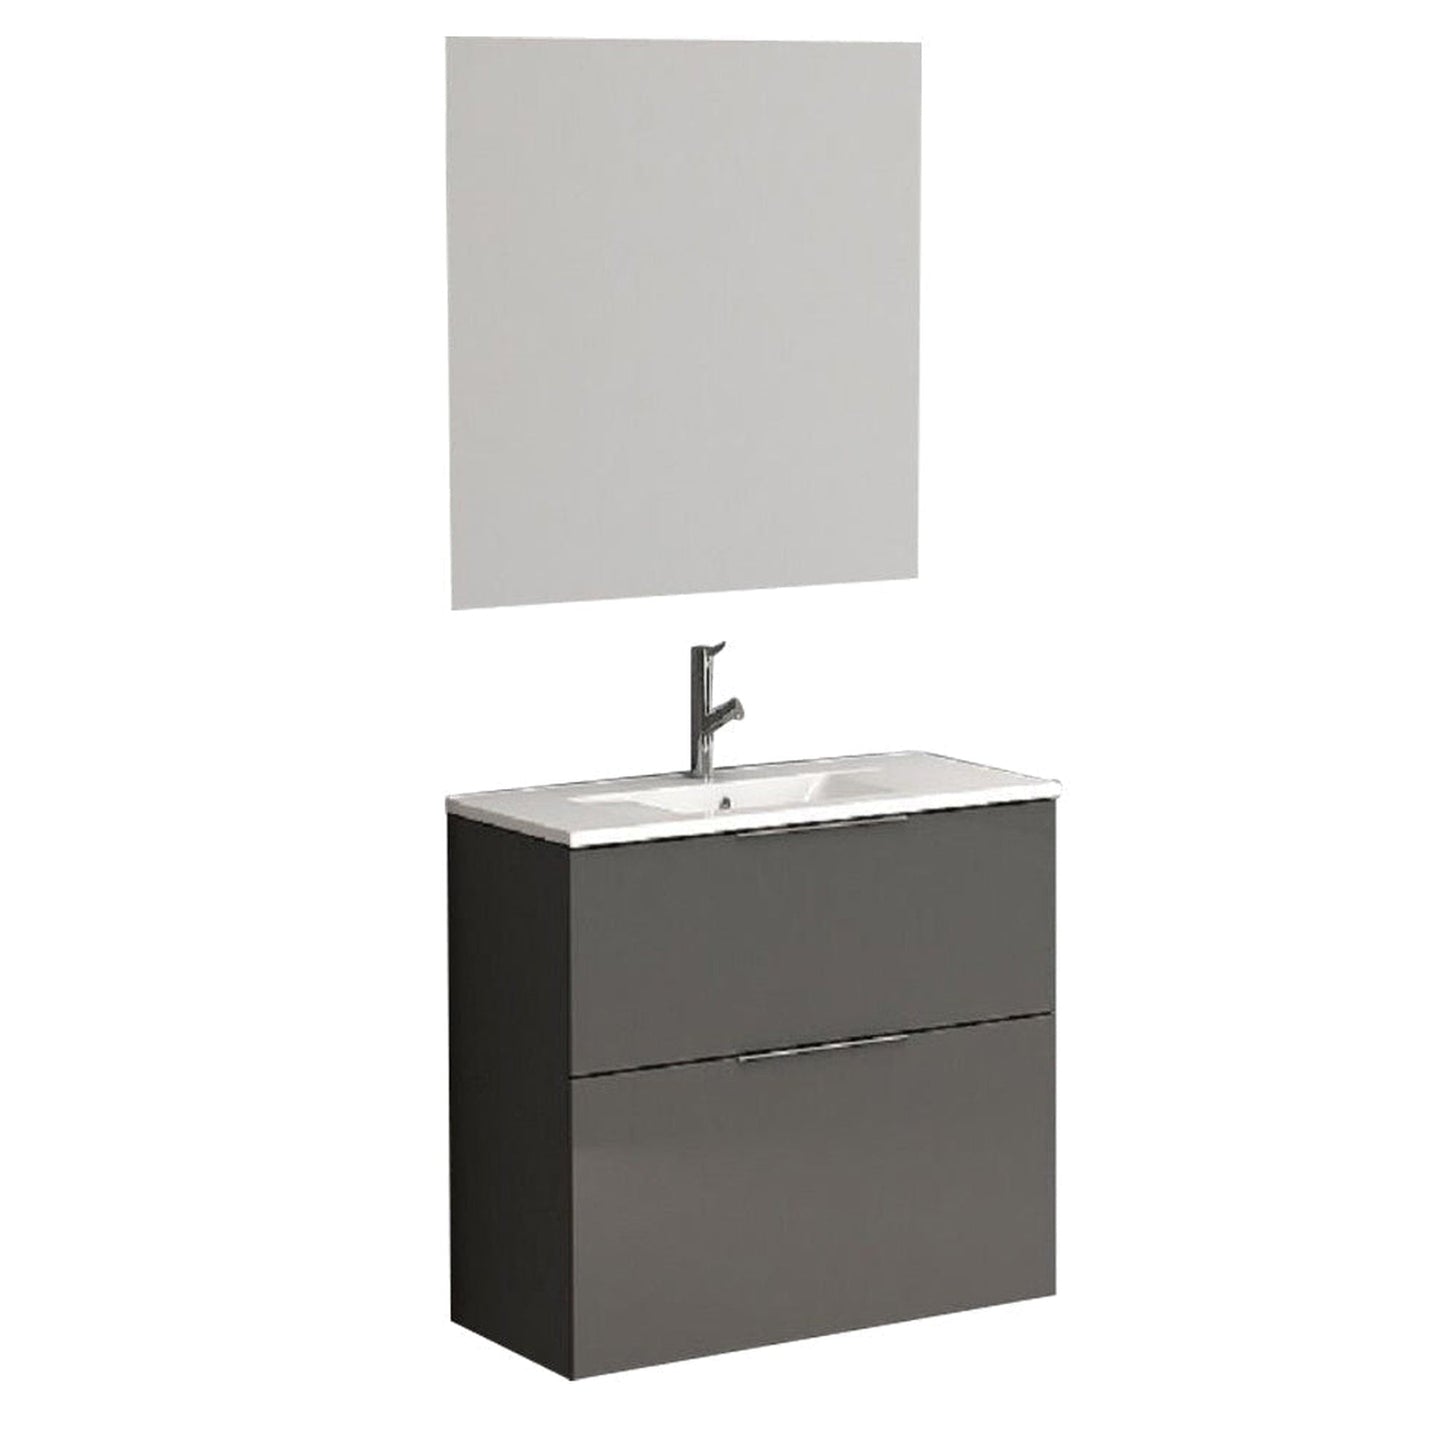 Eviva Galsaky 24” x 24” Gray Wall-Mounted Bathroom Vanity With White Integrated Porcelain Sink